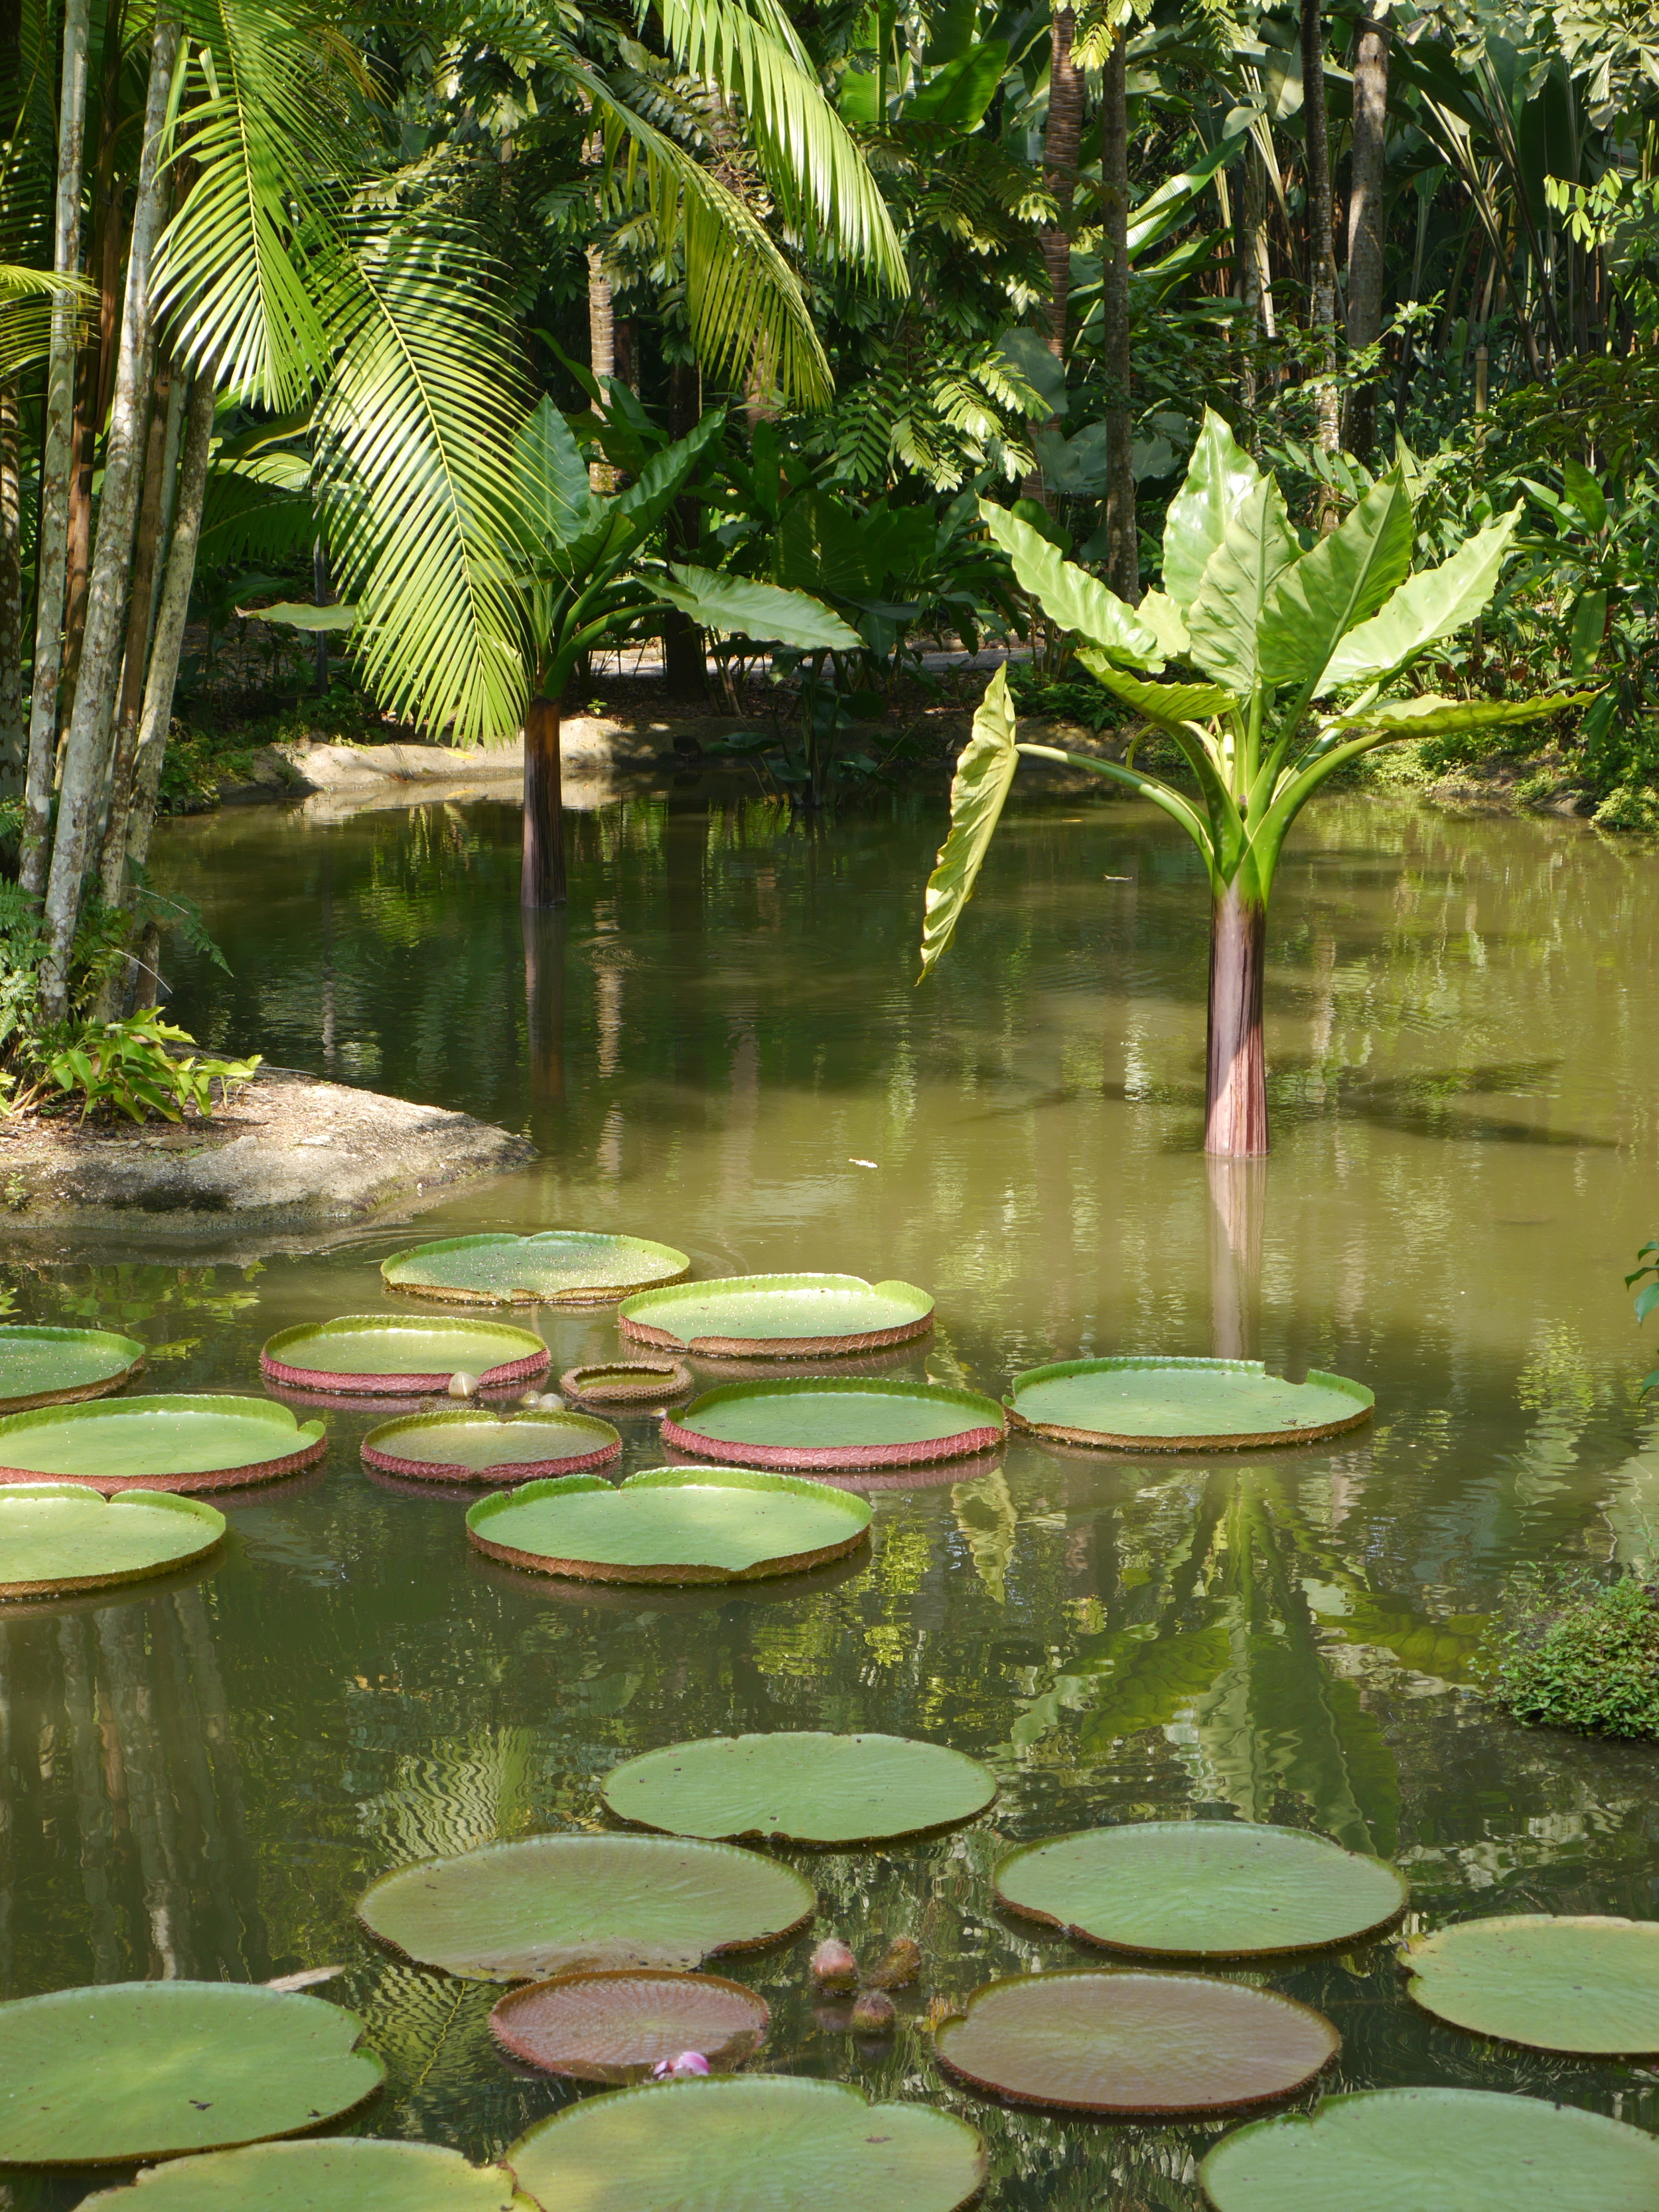  Huge lily pads and a submerged palm. 